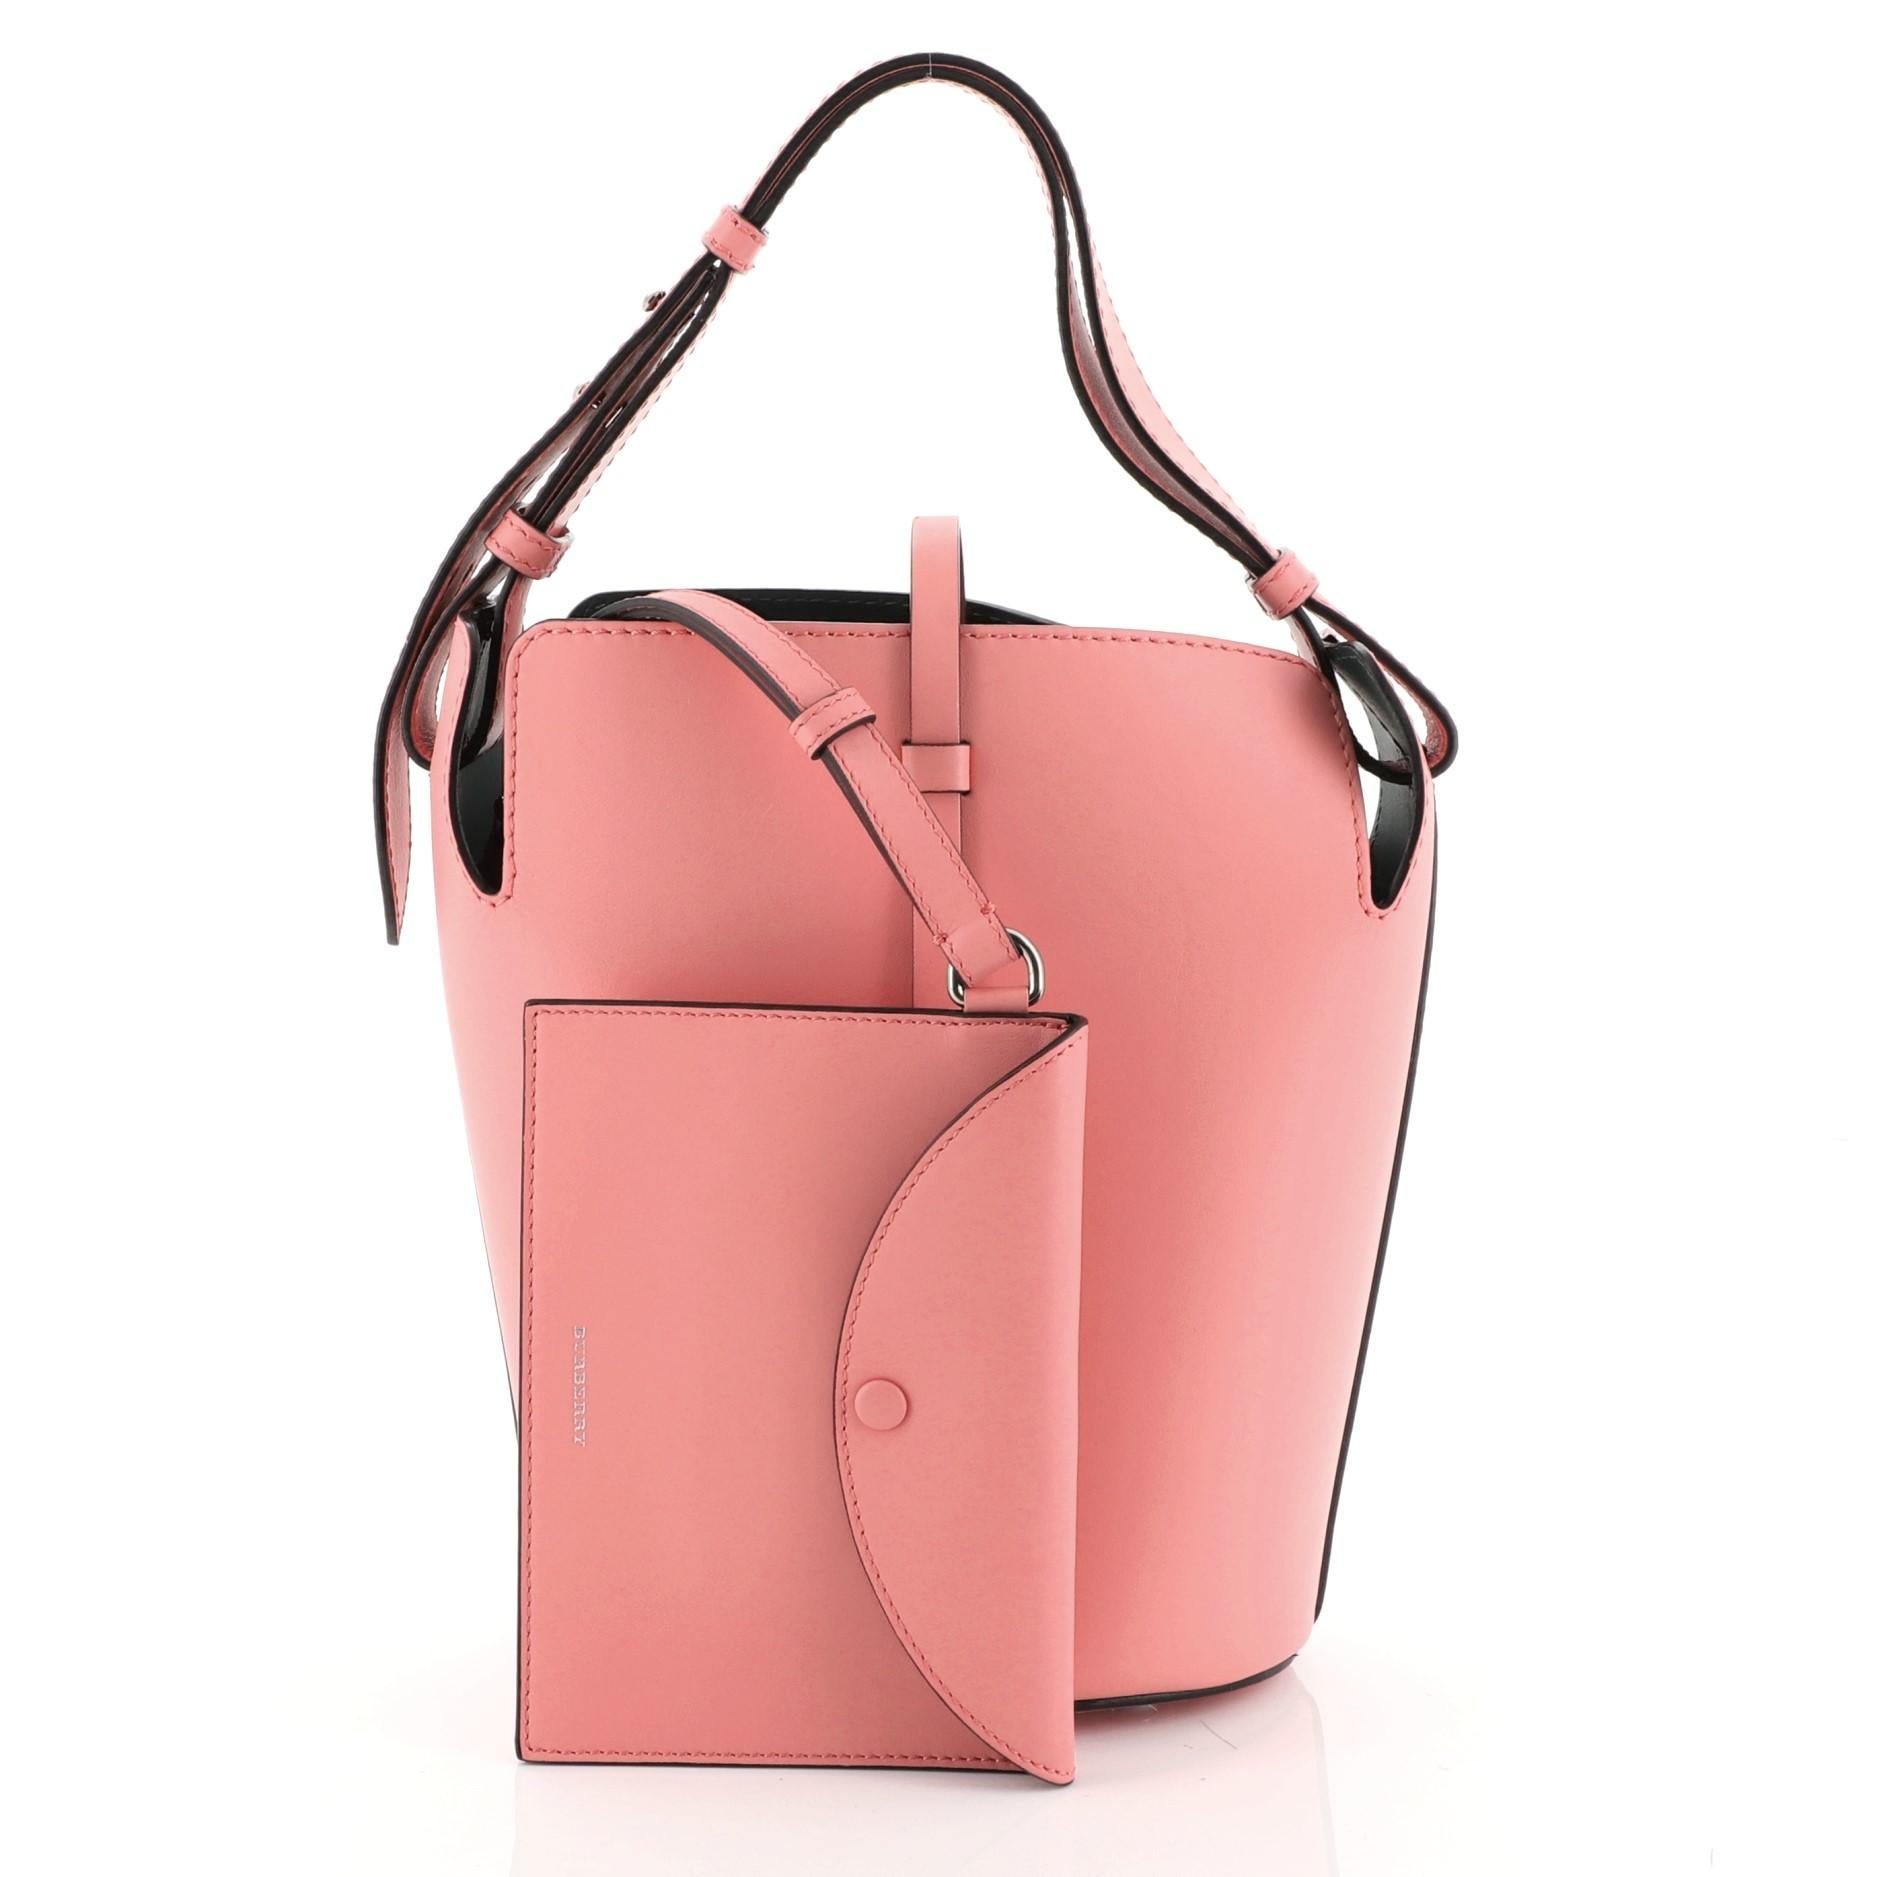 This Burberry Supple Bucket Bag Leather Medium, crafted from pink leather, features adjustable flat shoulder strap and aged silver-tone hardware. It opens to a green leather interior. 

Estimated Retail Price: $1,890
Condition: Great. Faint creasing